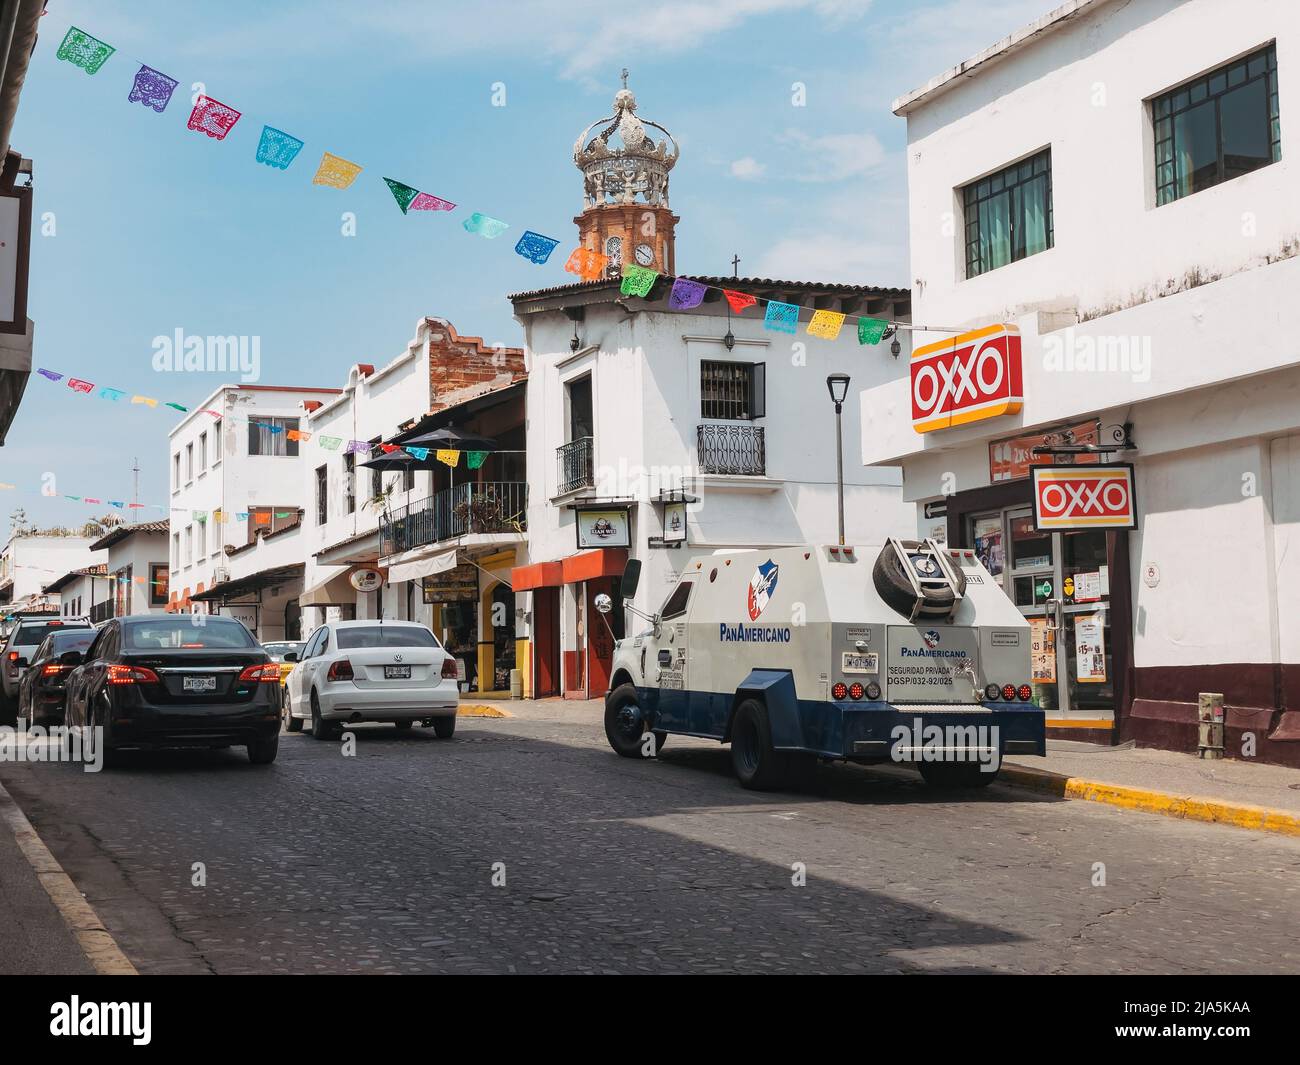 An armored security vehicle transporting cash, parked outside an Oxxo convenience store in the city of Puerto Vallarta, Jalisco, Mexico Stock Photo